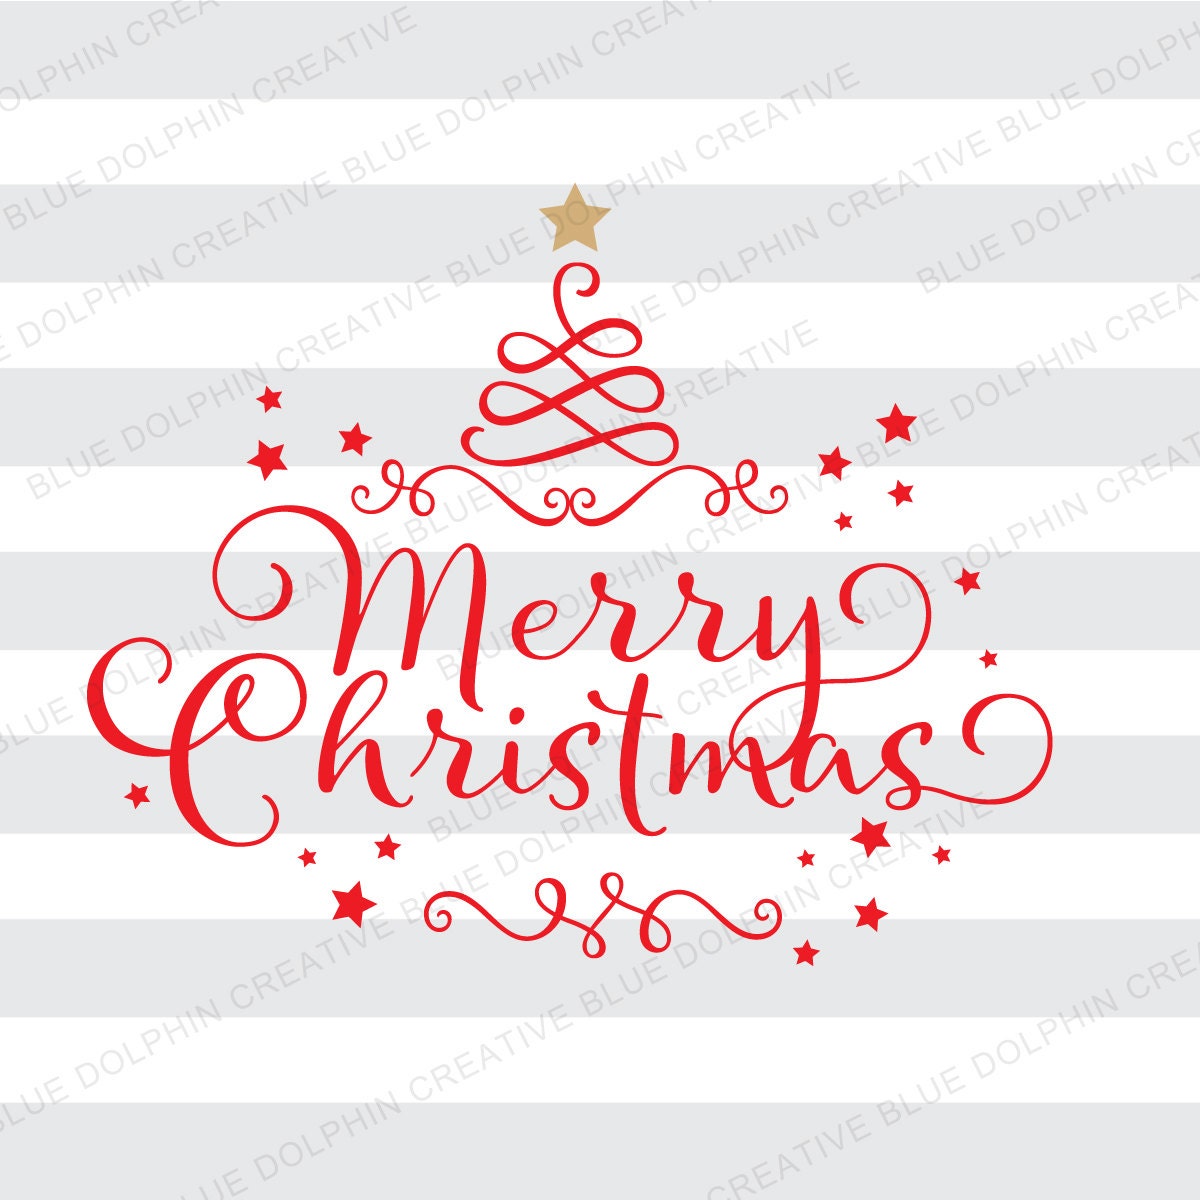 Download Merry Christmas tree shape SVG DXF png pdf jpg ai Red and